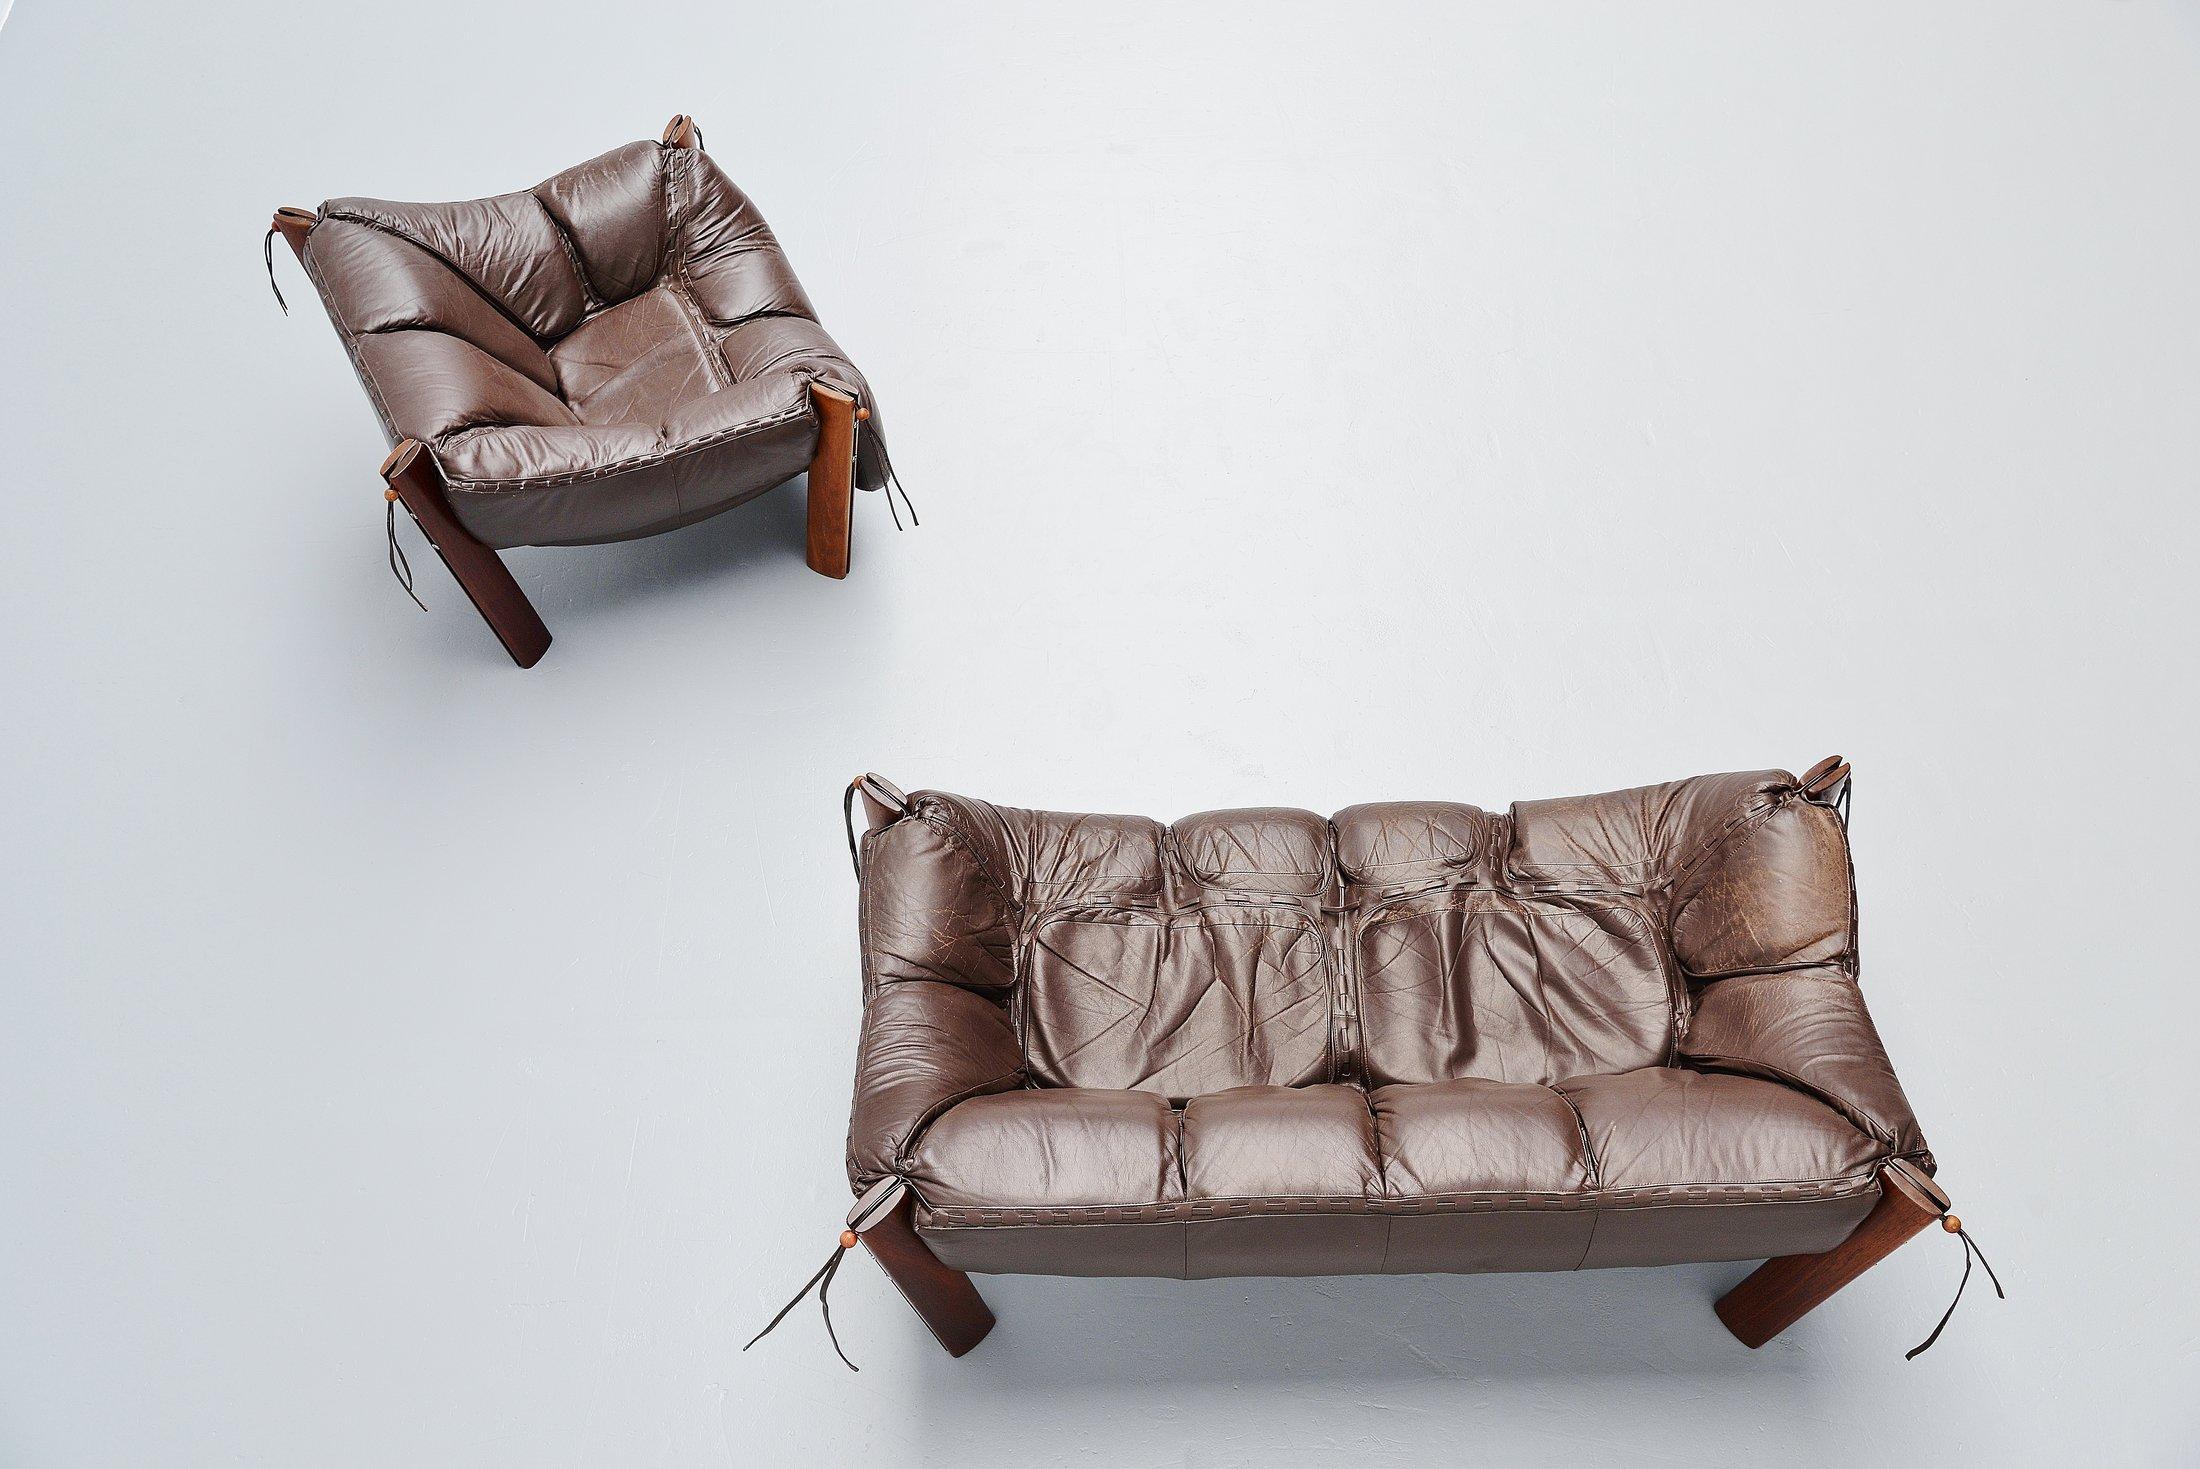 Leather Percival Lafer Two-Seat Sofa in Mahogany Brazil, 1960